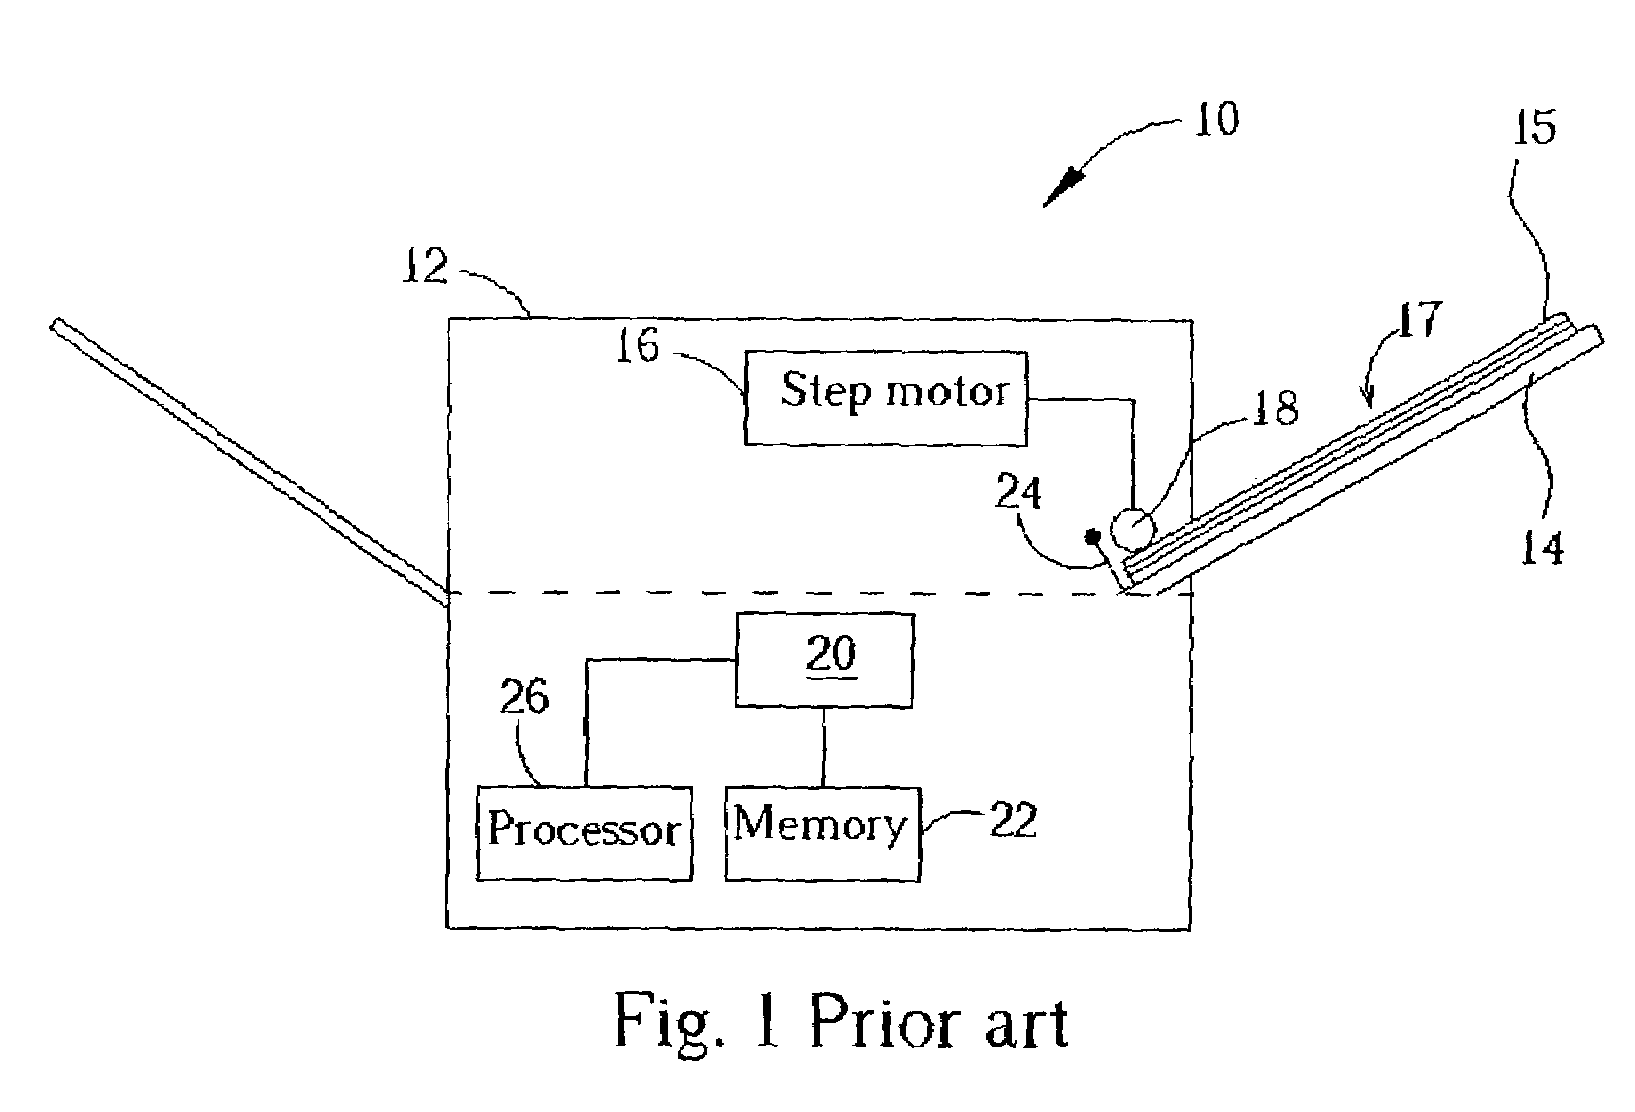 Method for acquiring document images with a paper feed scanner